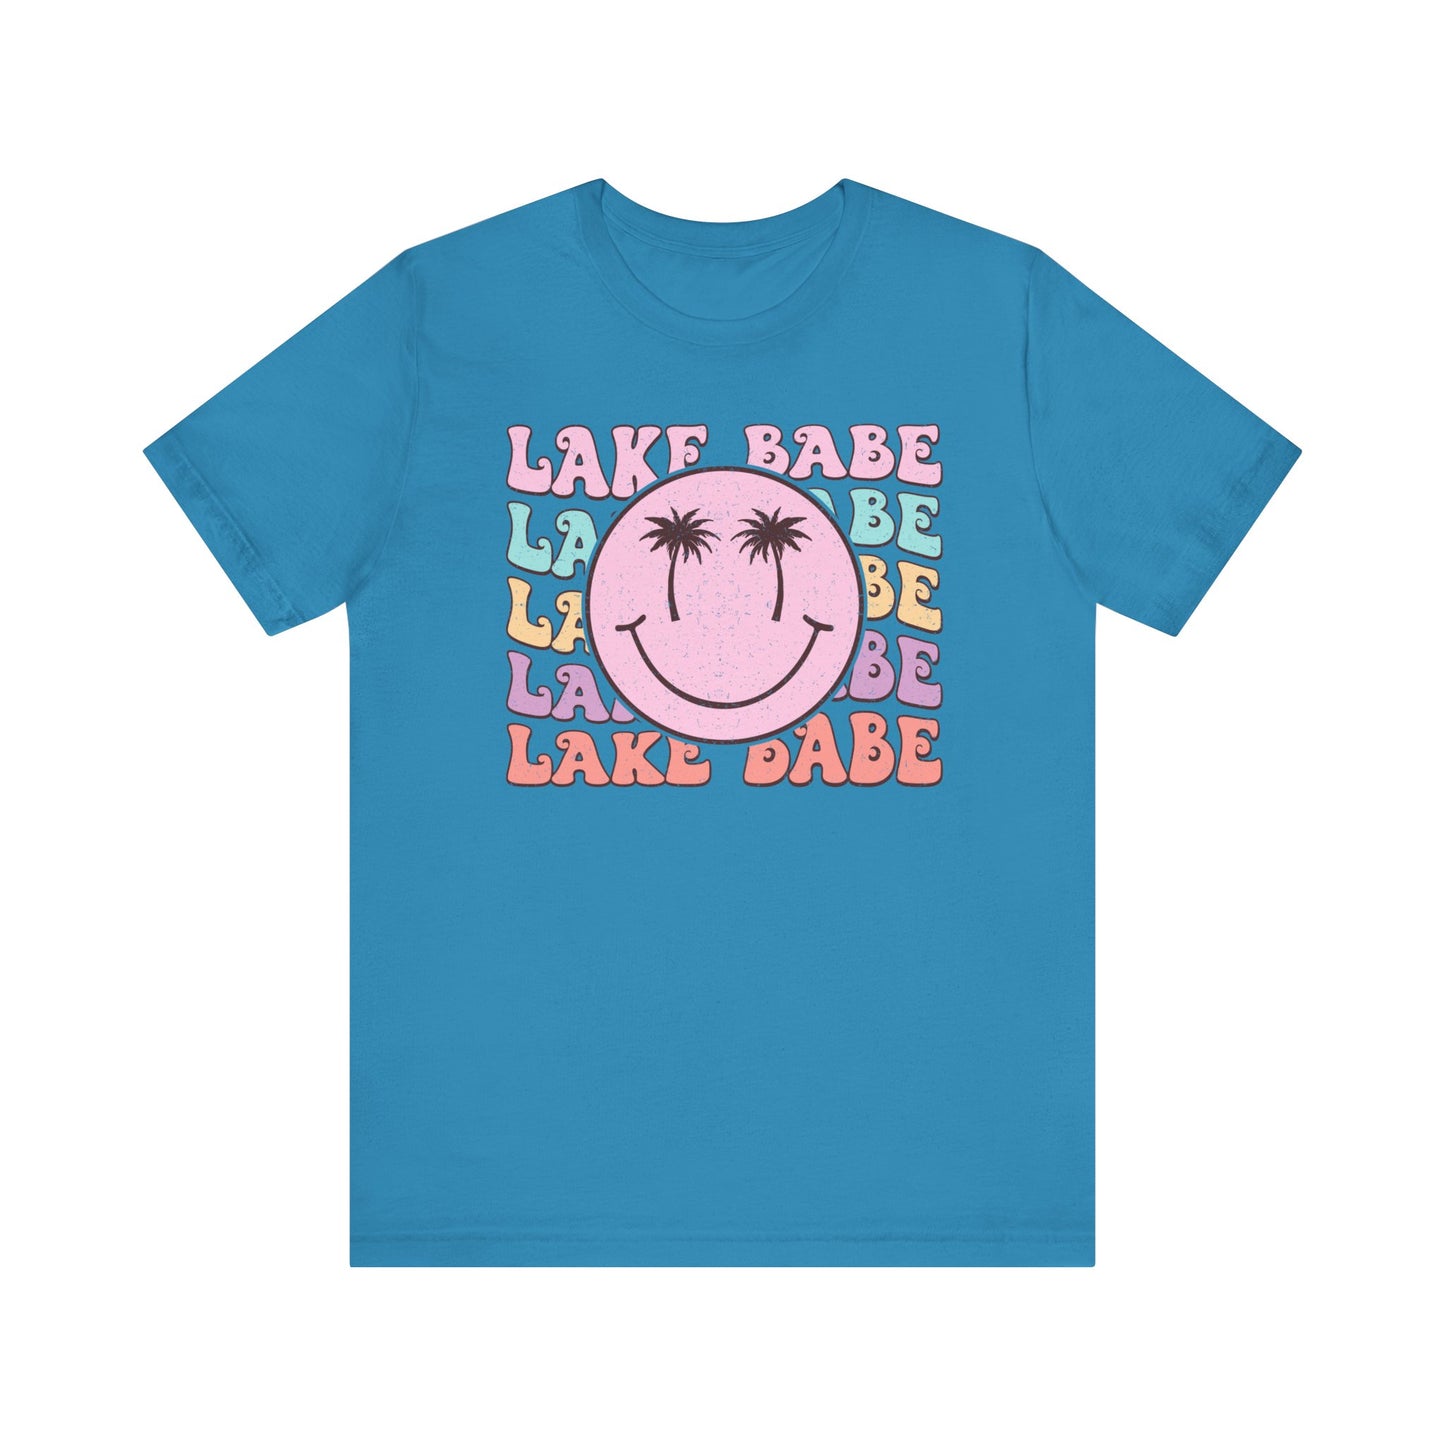 Lake Babe Graphic Tee, Palm Tree Summer T-Shirt, Casual Beachwear, Cute Vacation Top, Women's Relaxing Holiday Apparel